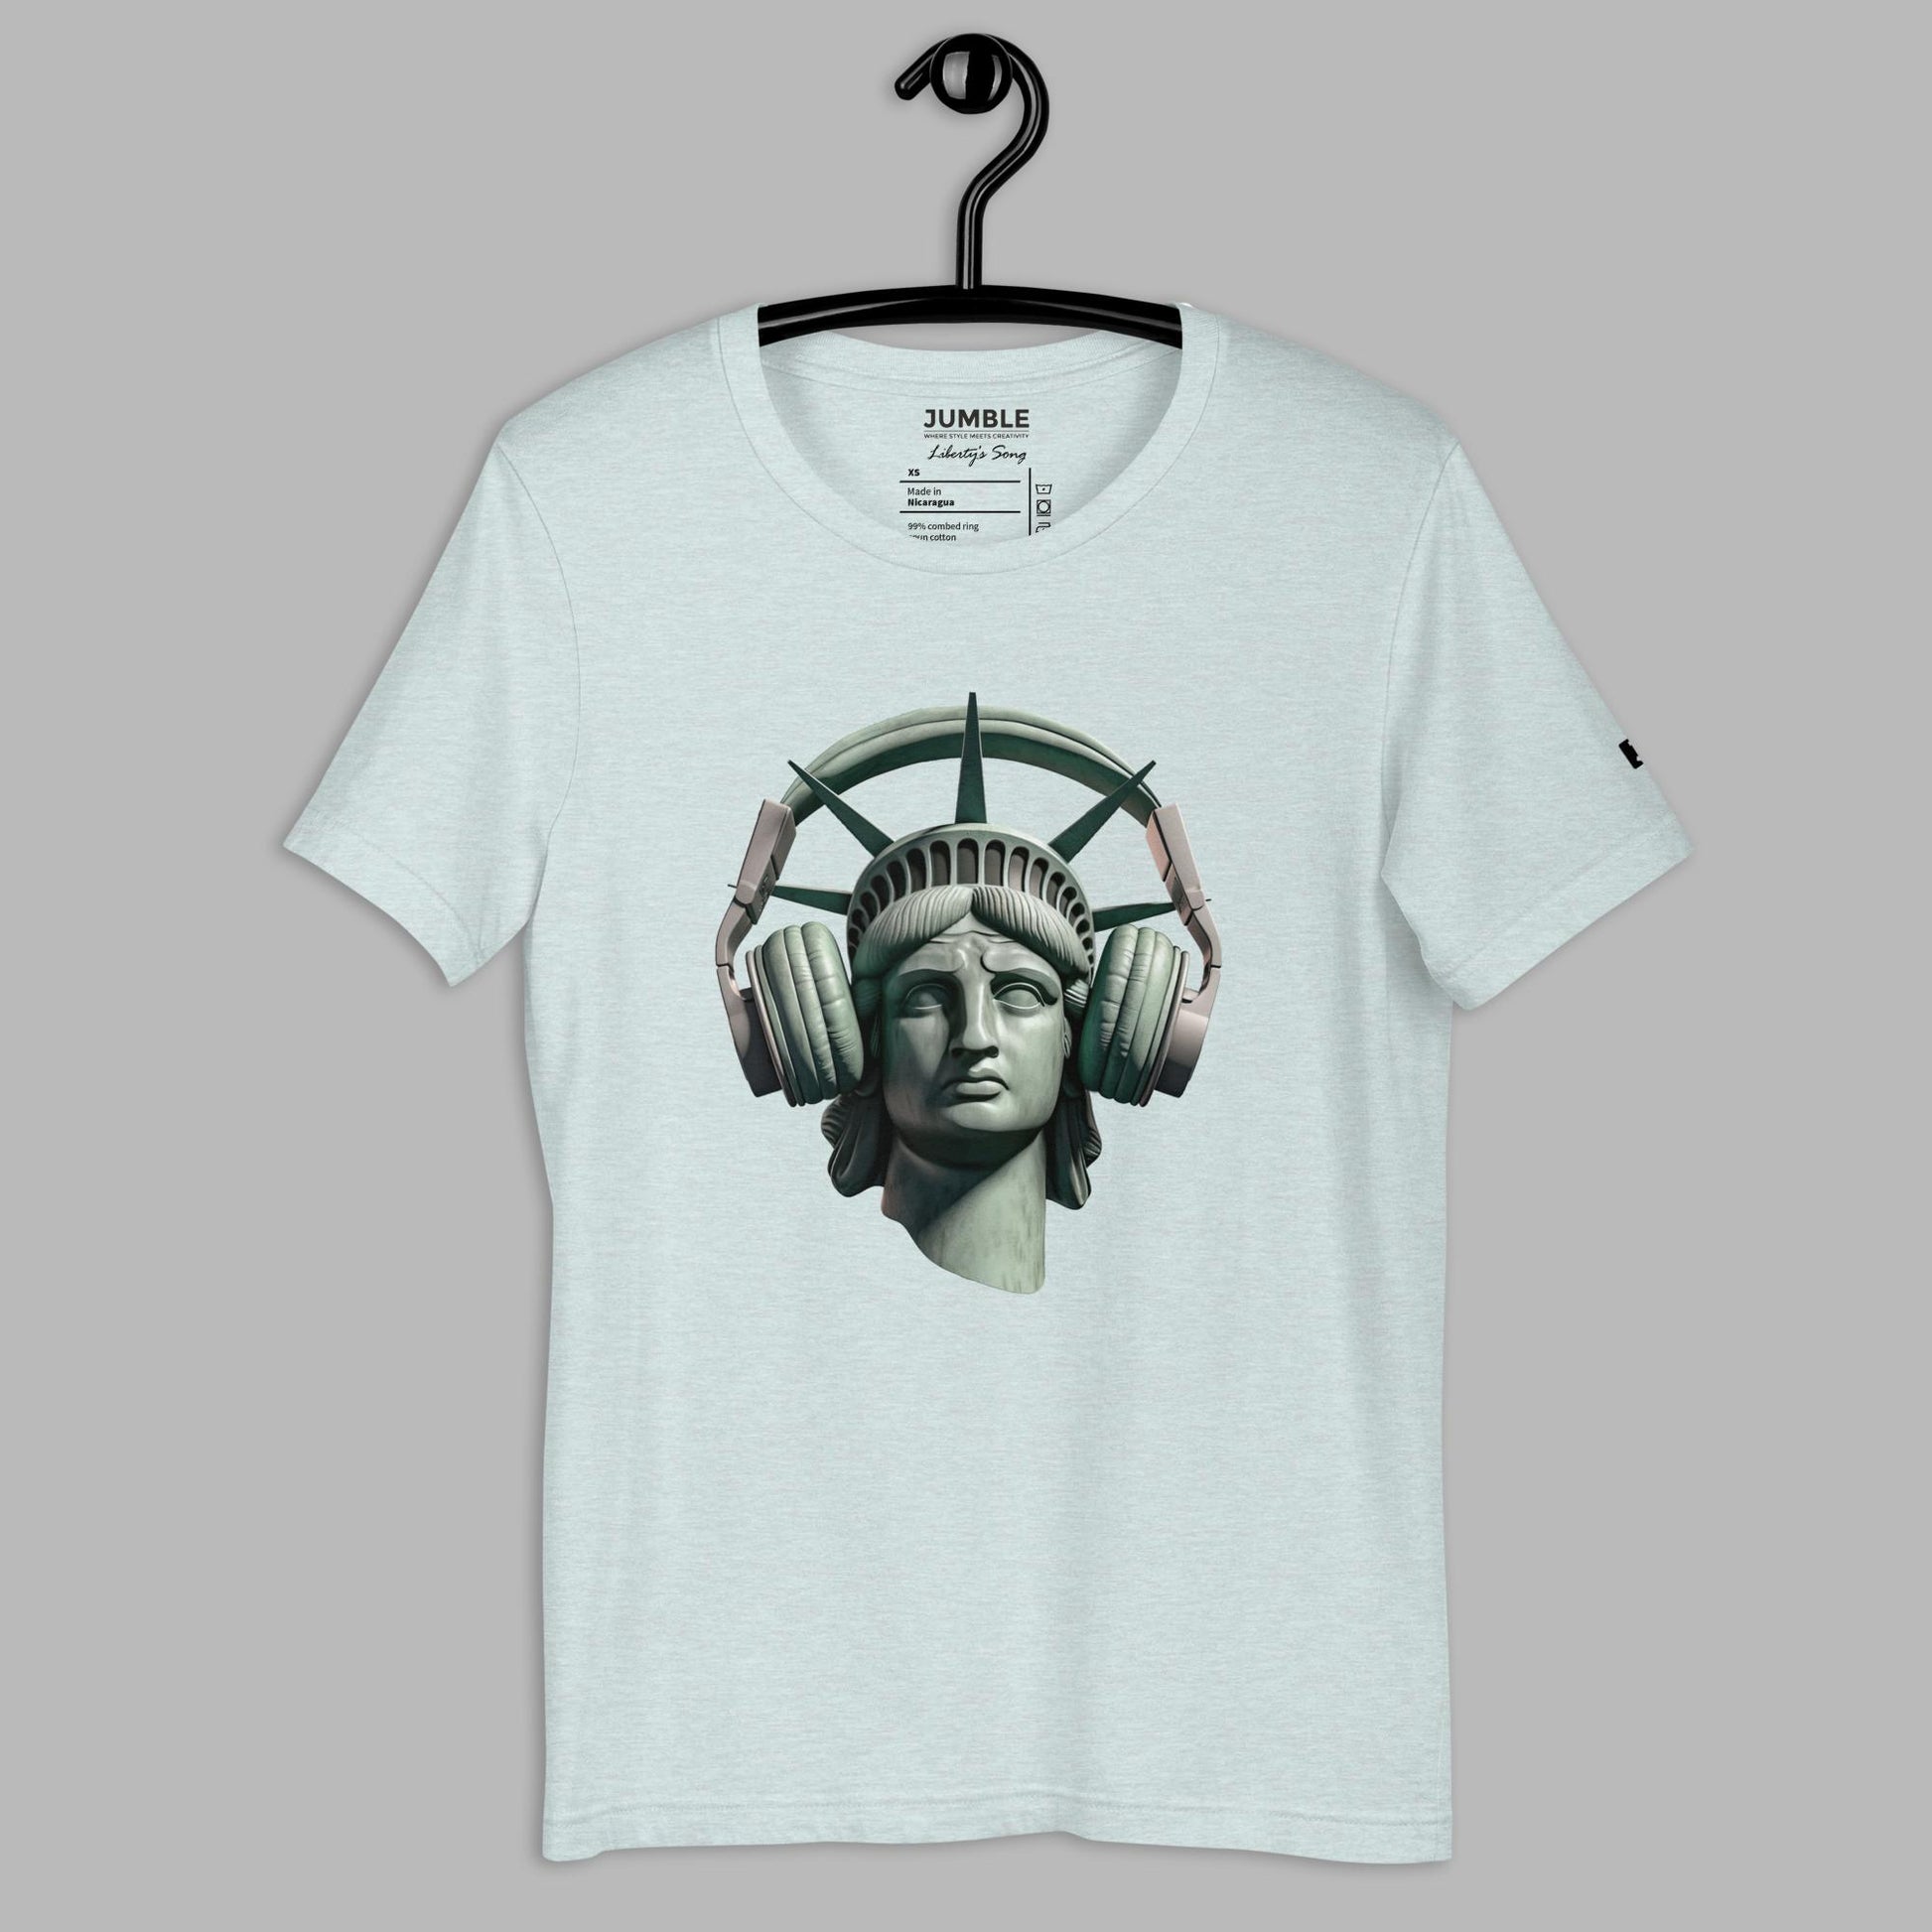 Liberty's Song Unisex t-shirt displayed on hanger